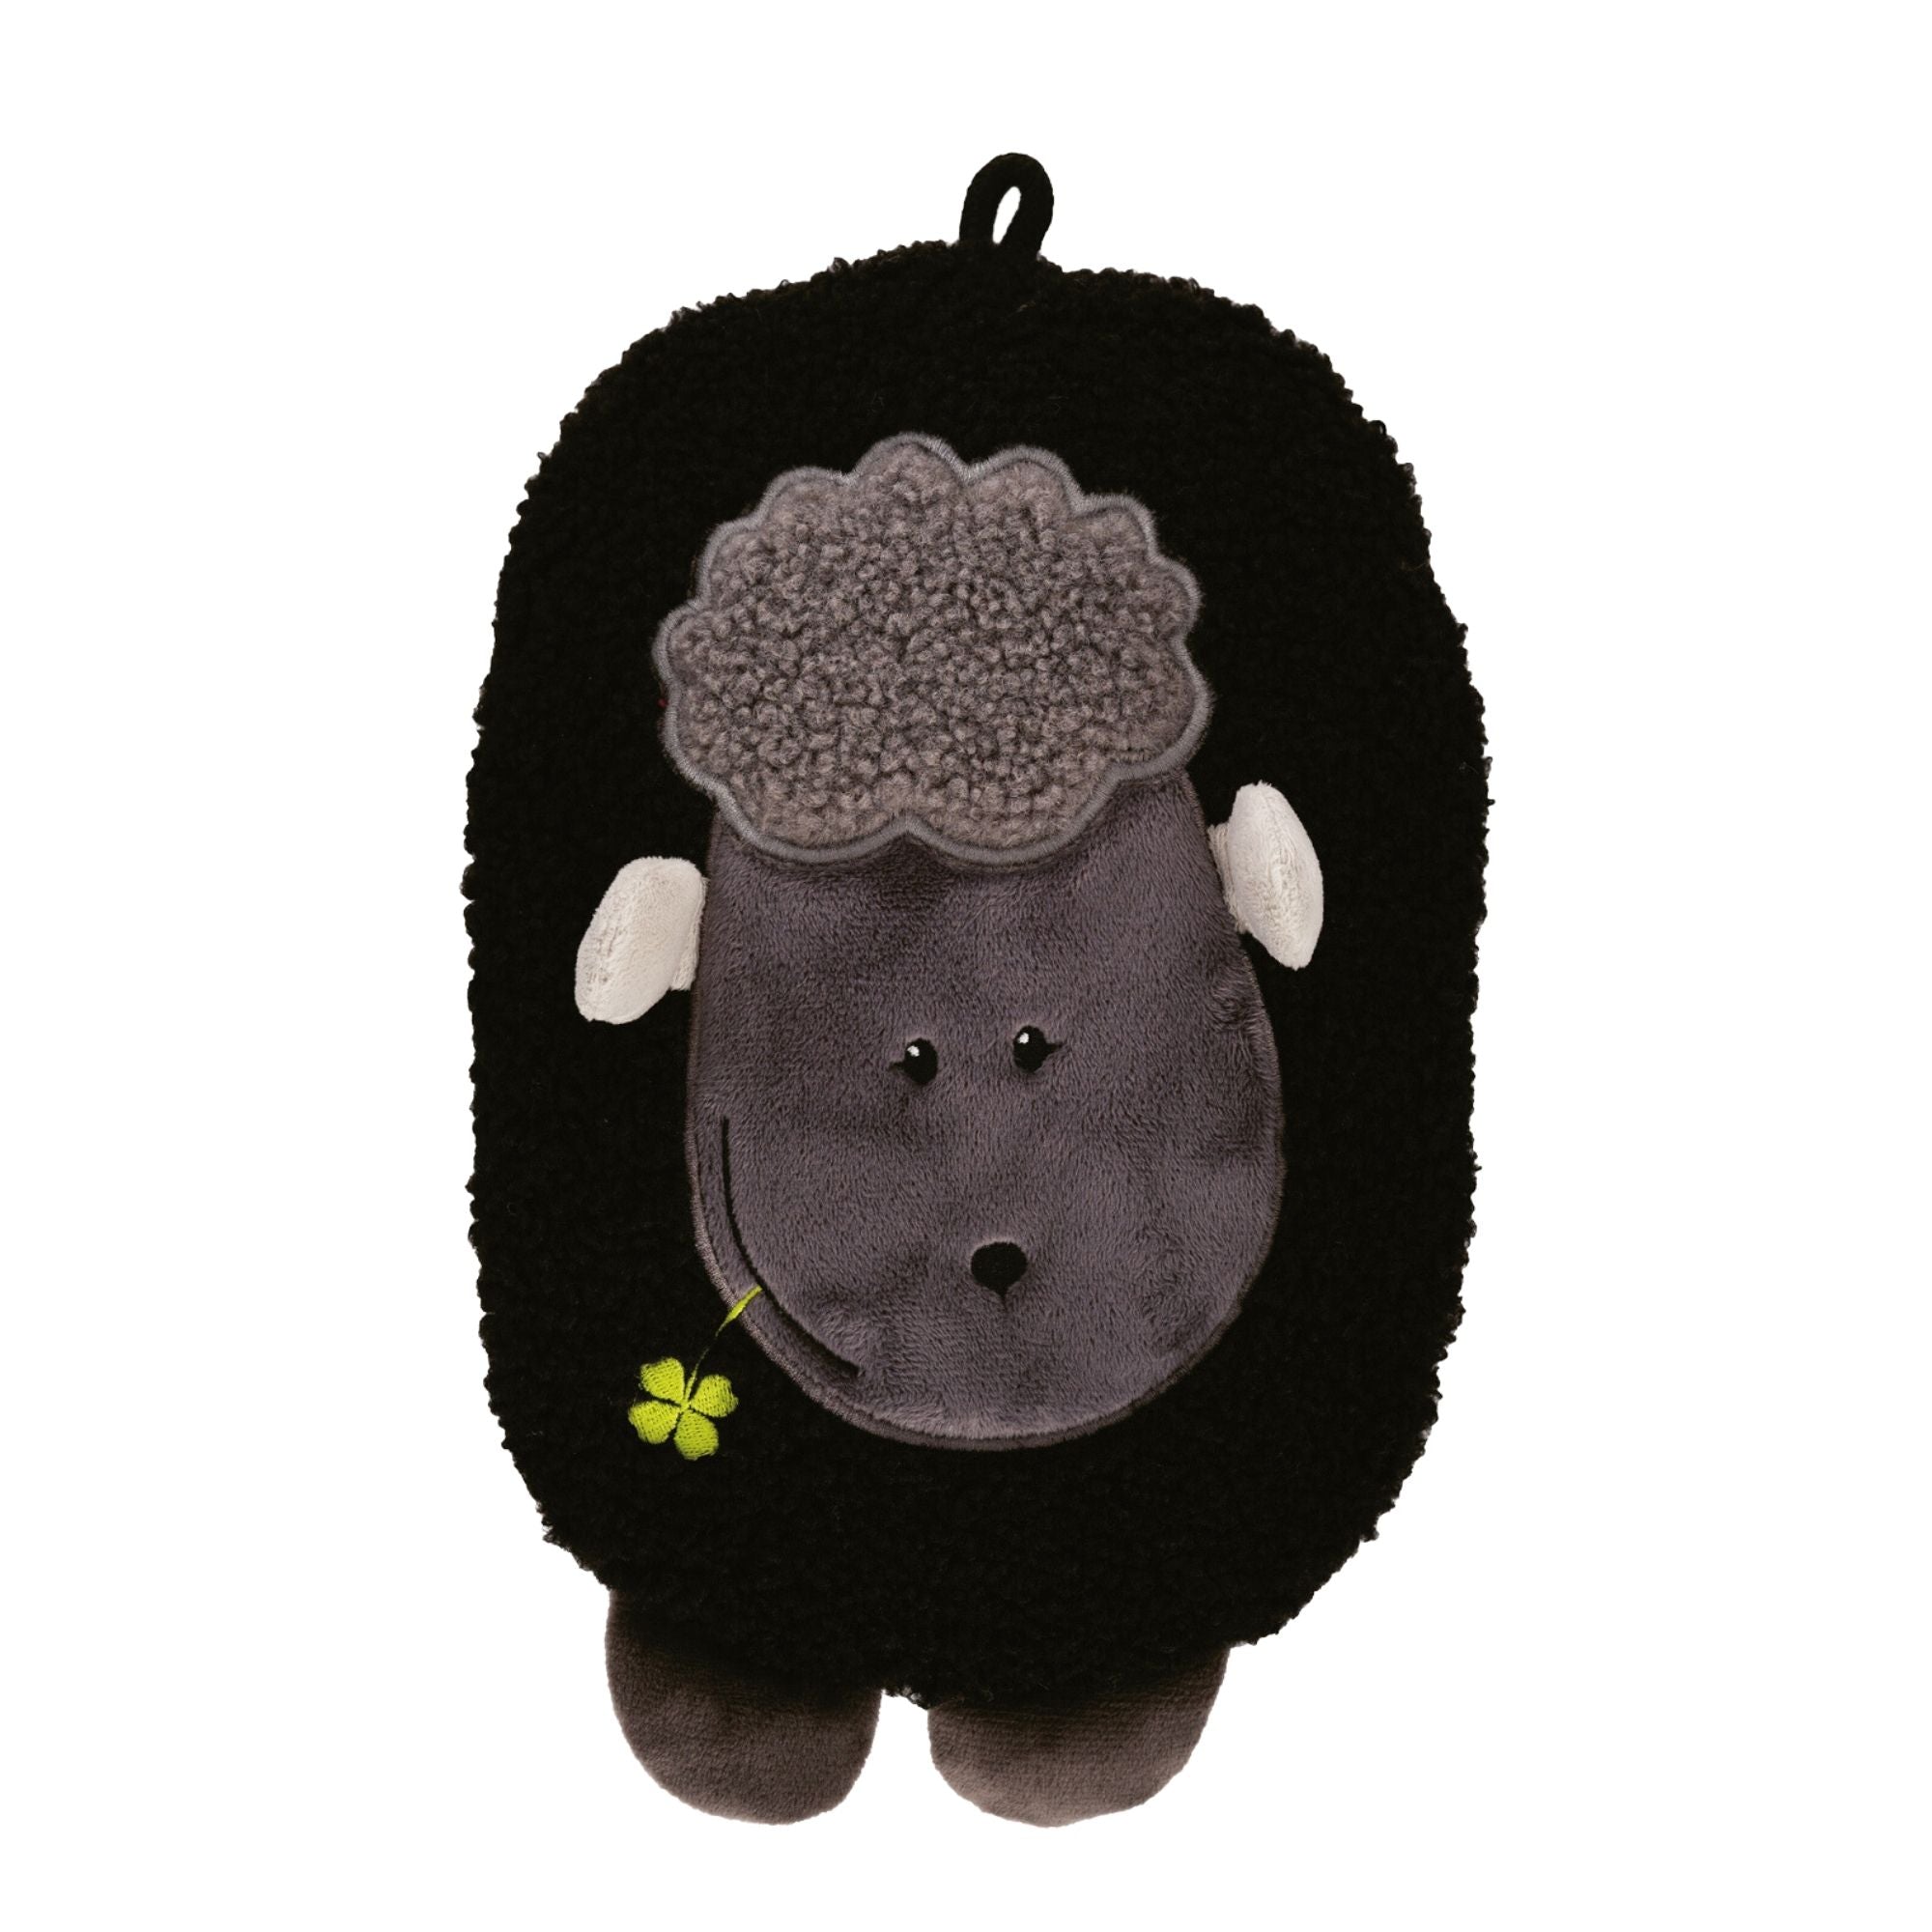 0.8 Litre Eco Hot Water Bottle with Black Lamb Fluffy Cover (rubberless)